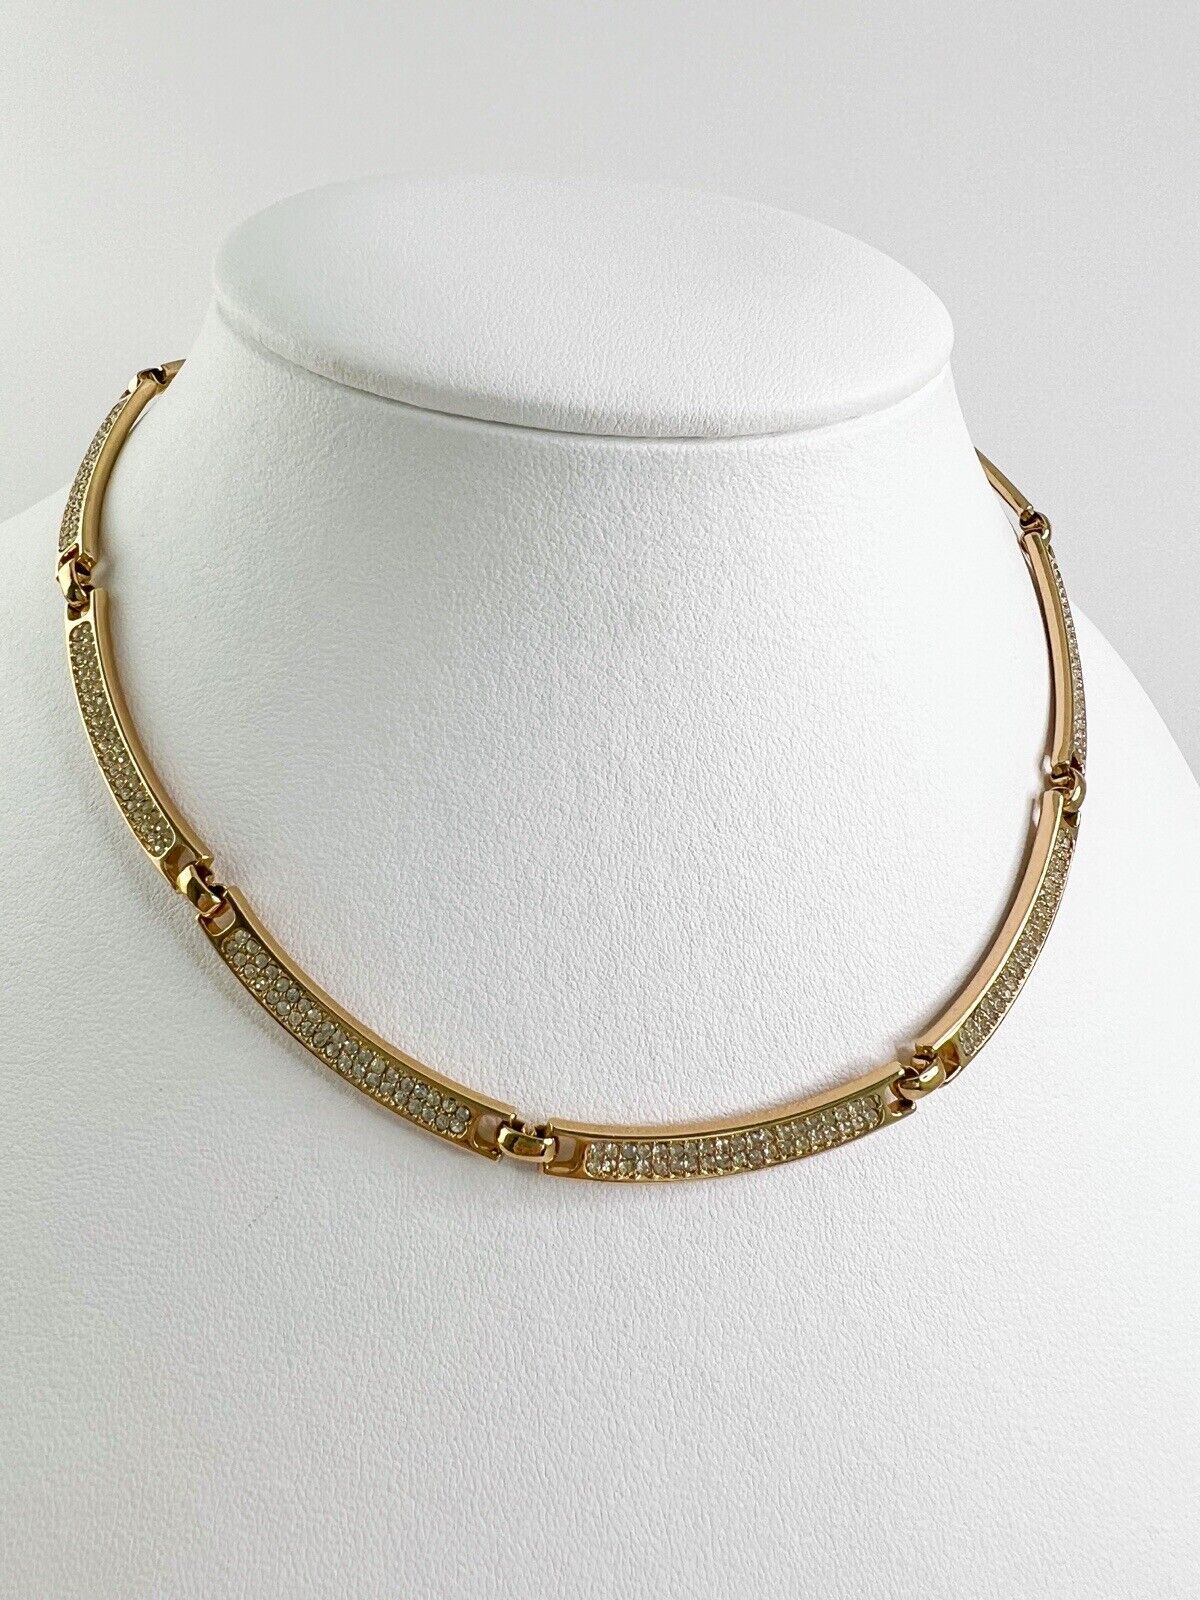 Vintage Christian Dior Necklace, Dior Necklace, Vintage Necklace, Choker Necklace Gold, Chunky Necklace, Gift for her, Jewelry for Women